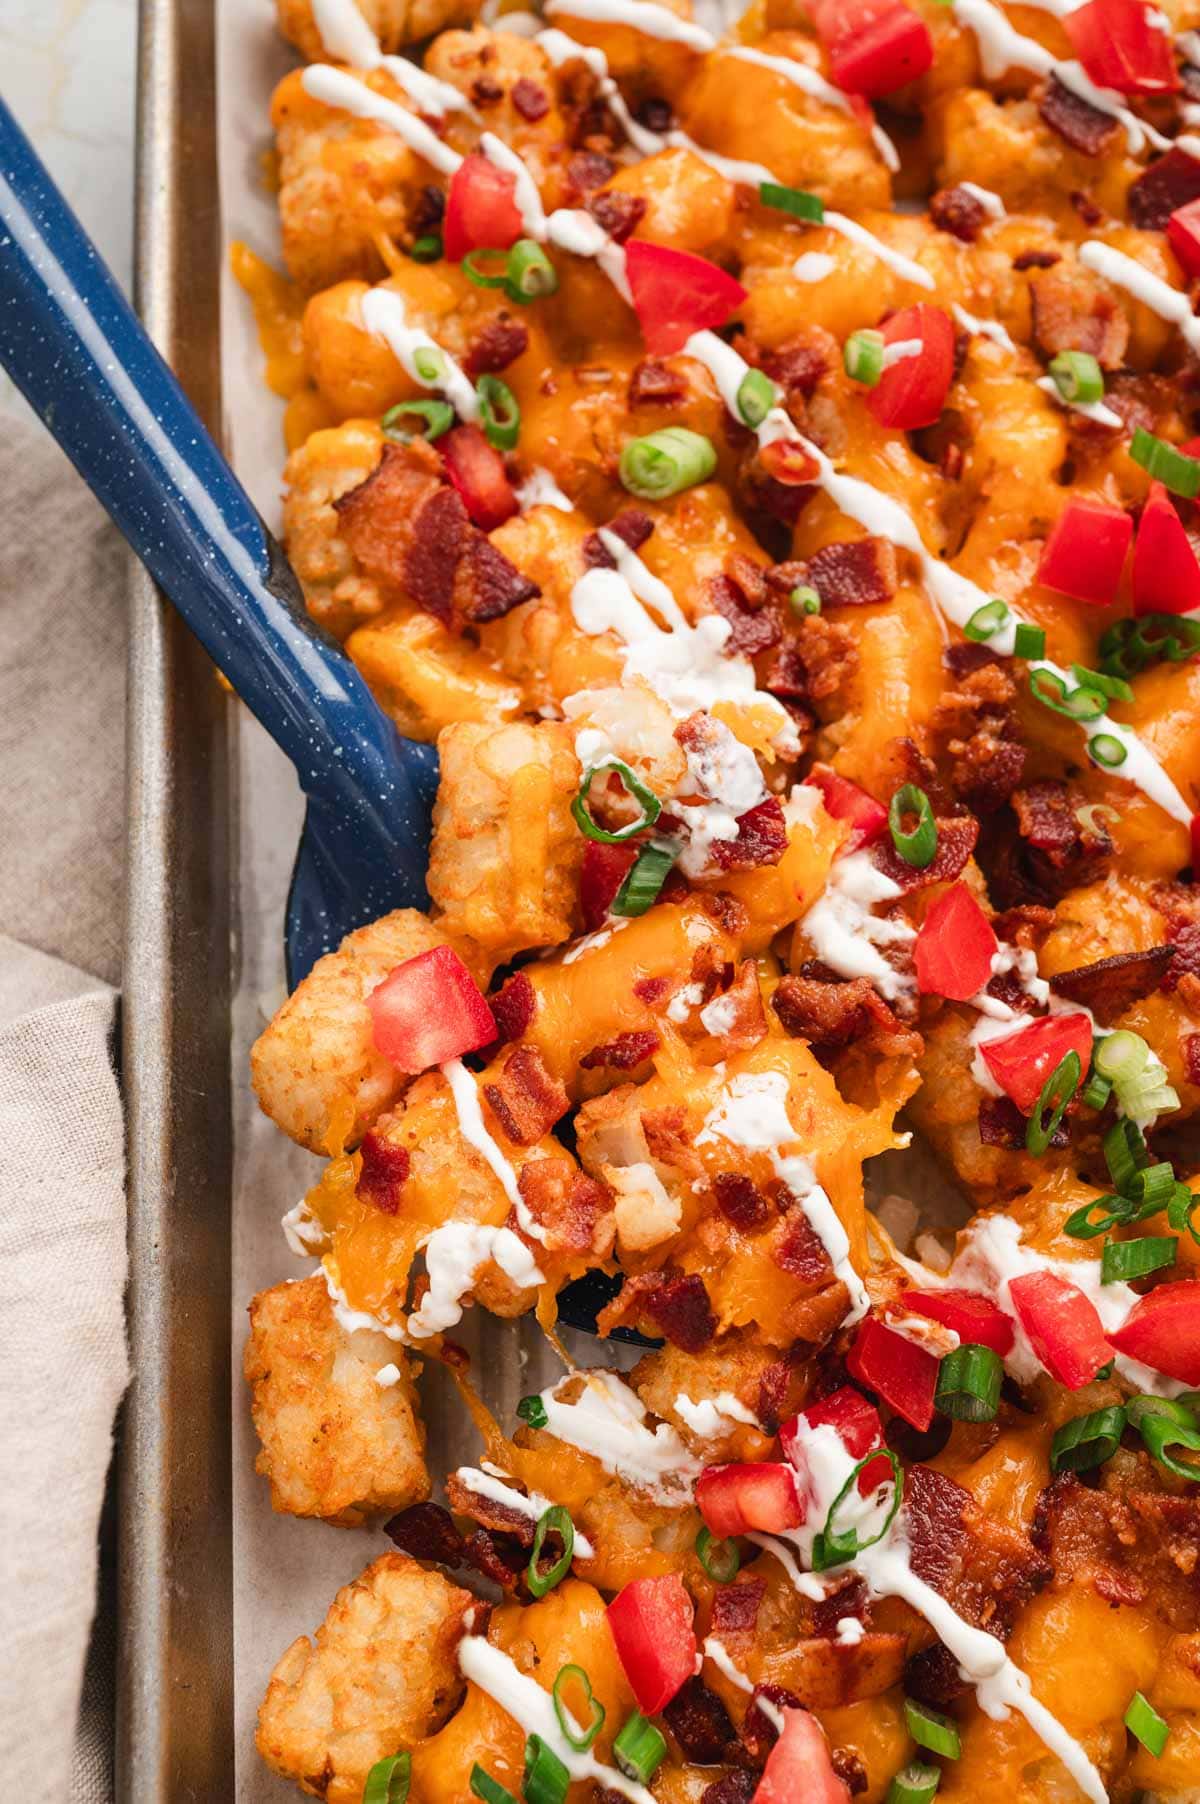 Pan of tater tots with melted cheese, bacon, green onions and sour cream.